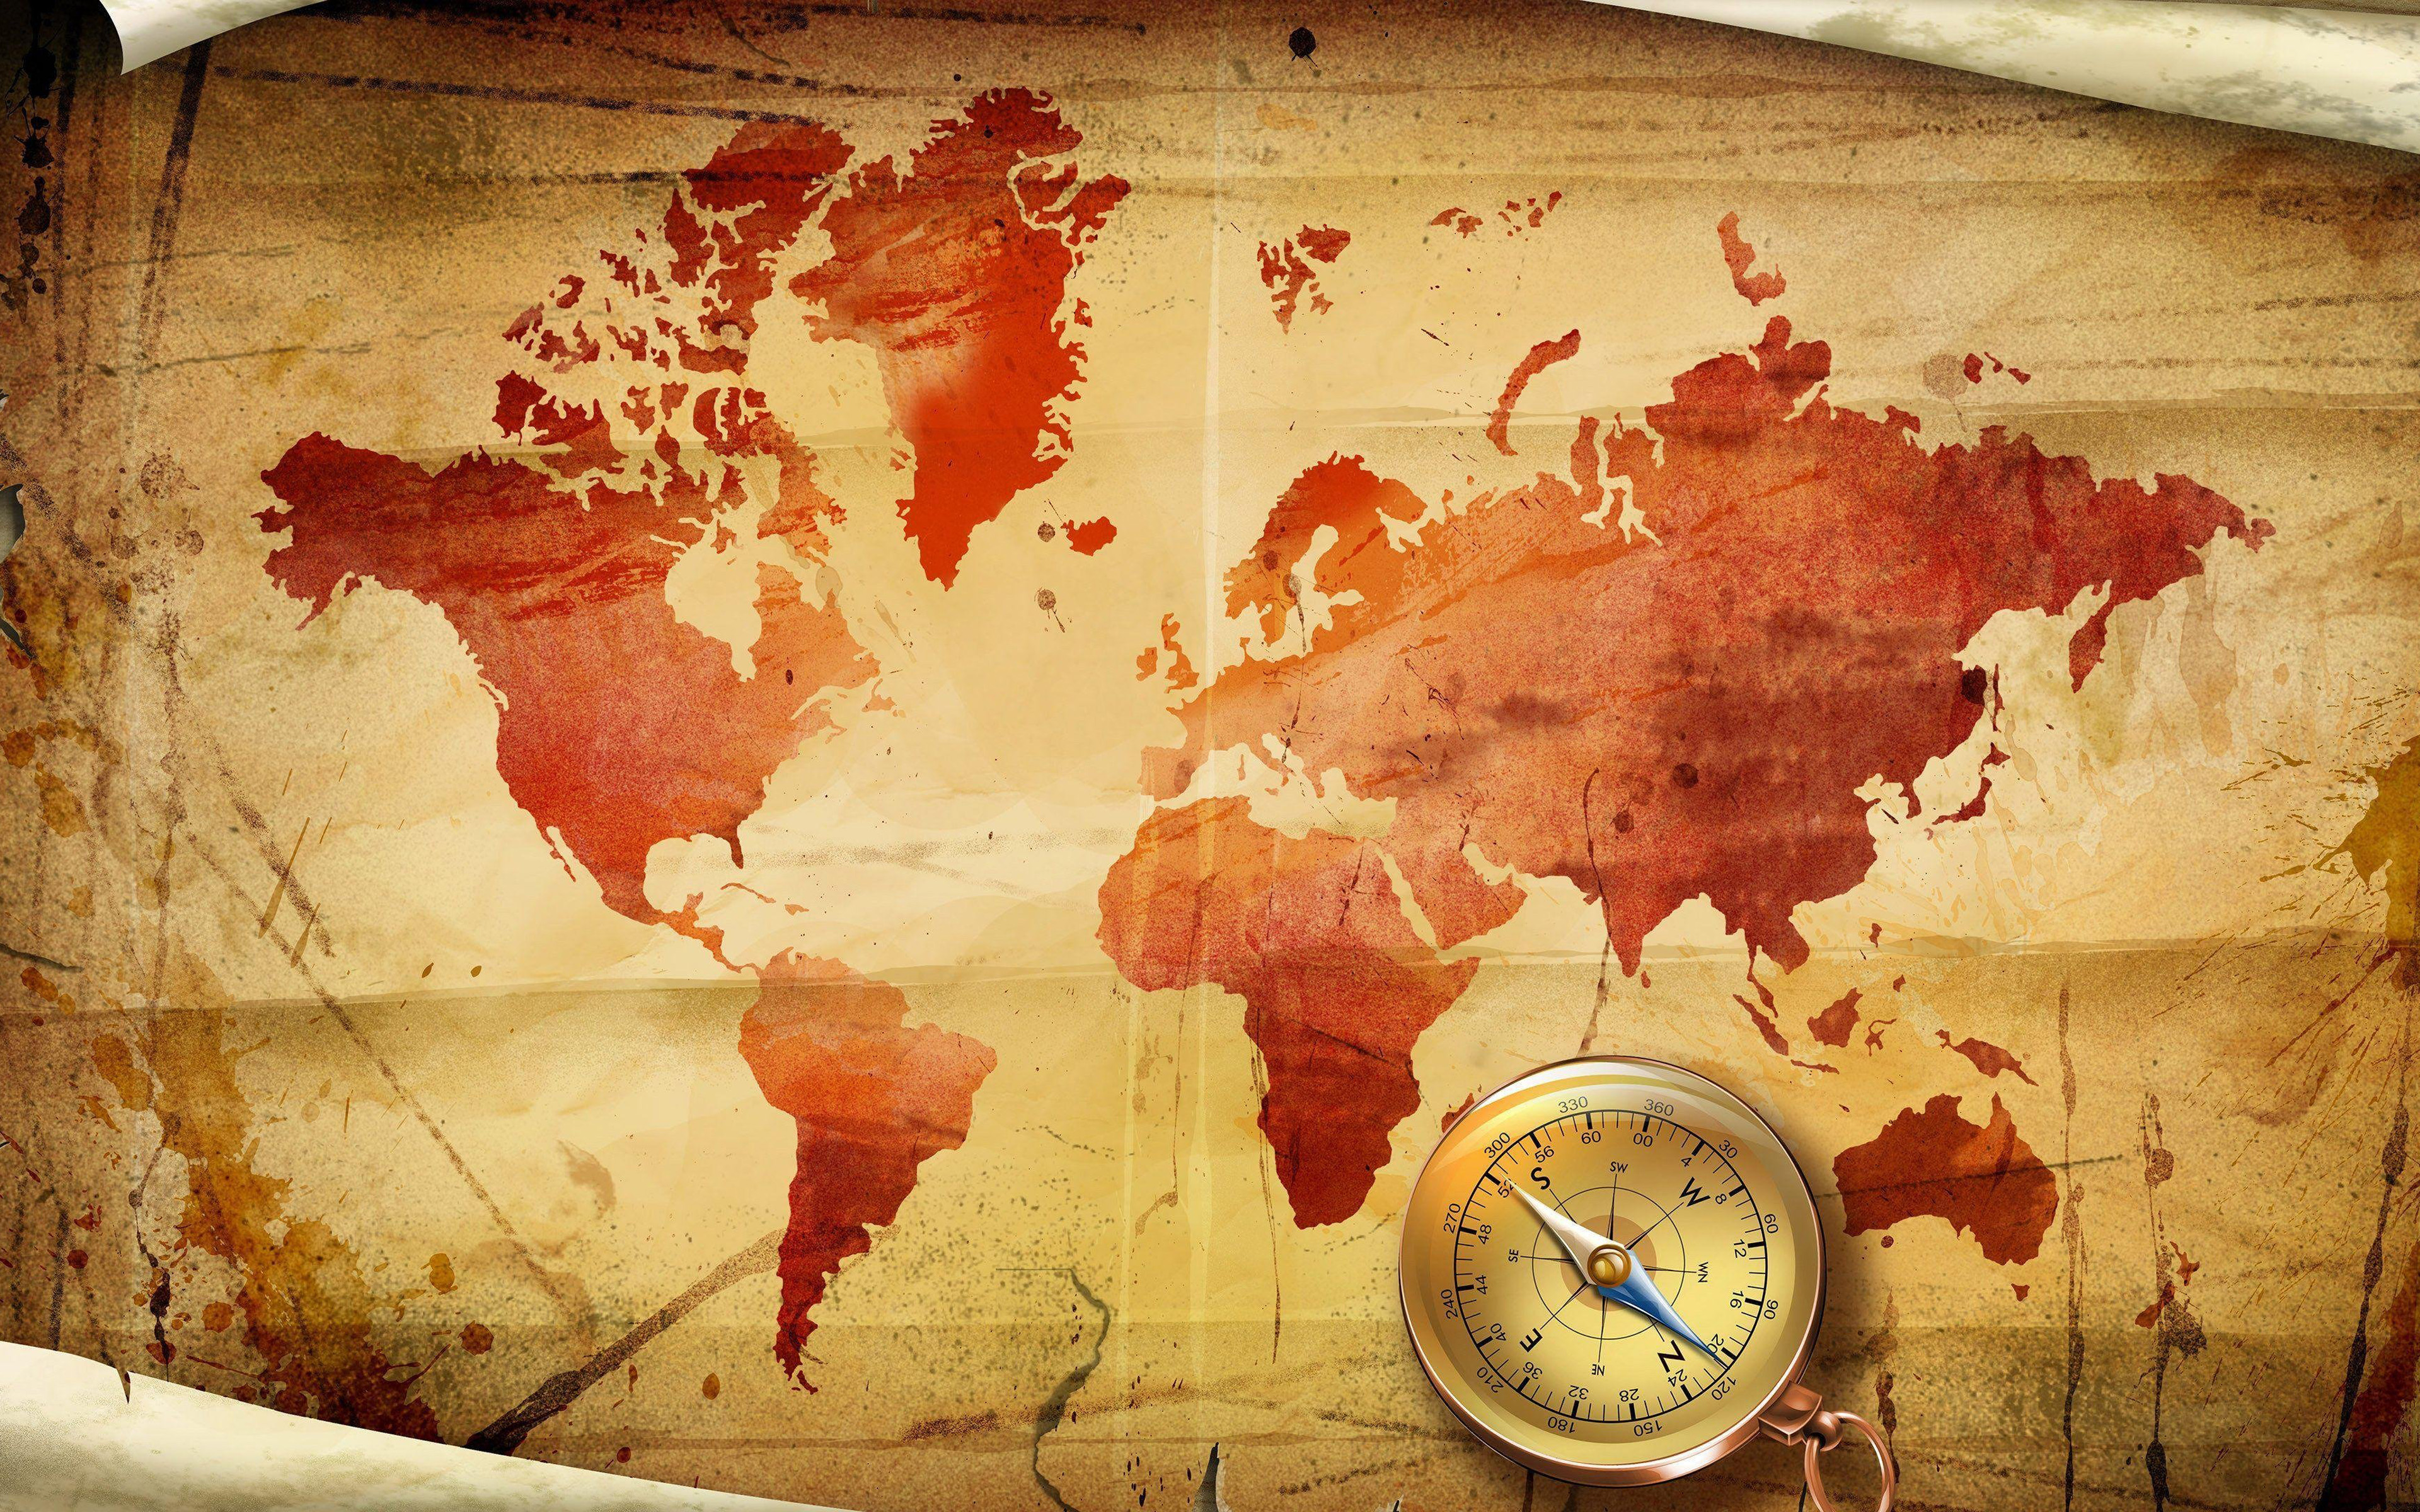 Download wallpapers old paper world map 4k compass old map world map  concepts travel concepts world maps for desktop with resolution  3840x2400 High Quality HD pictures wallpapers